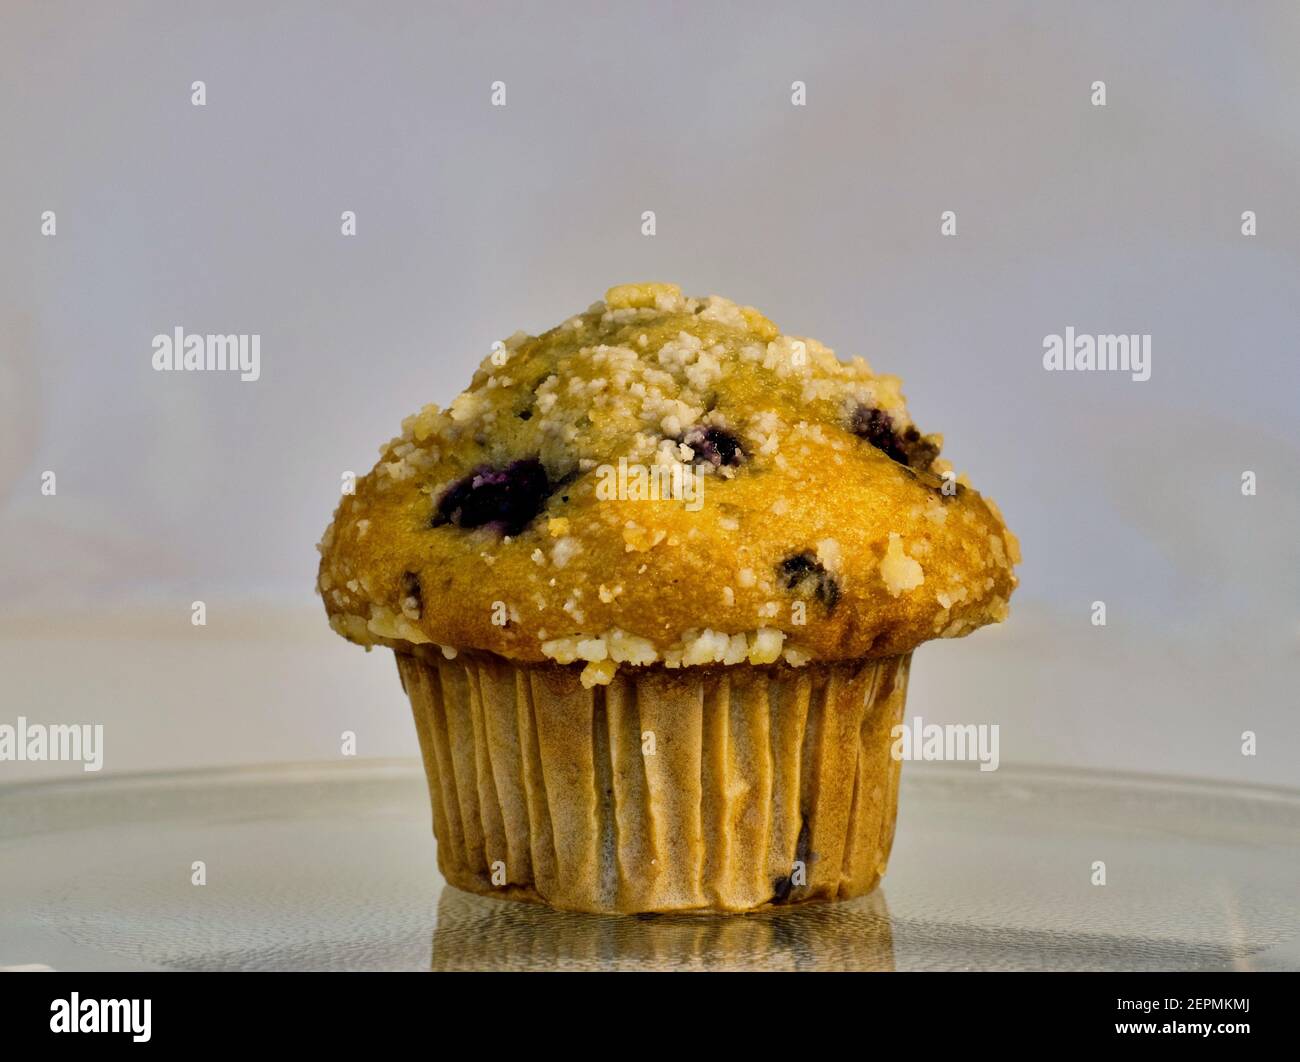 Single Blueberry muffin centered and isolated on a microwave oven carousel, close up at eye level. Stock Photo